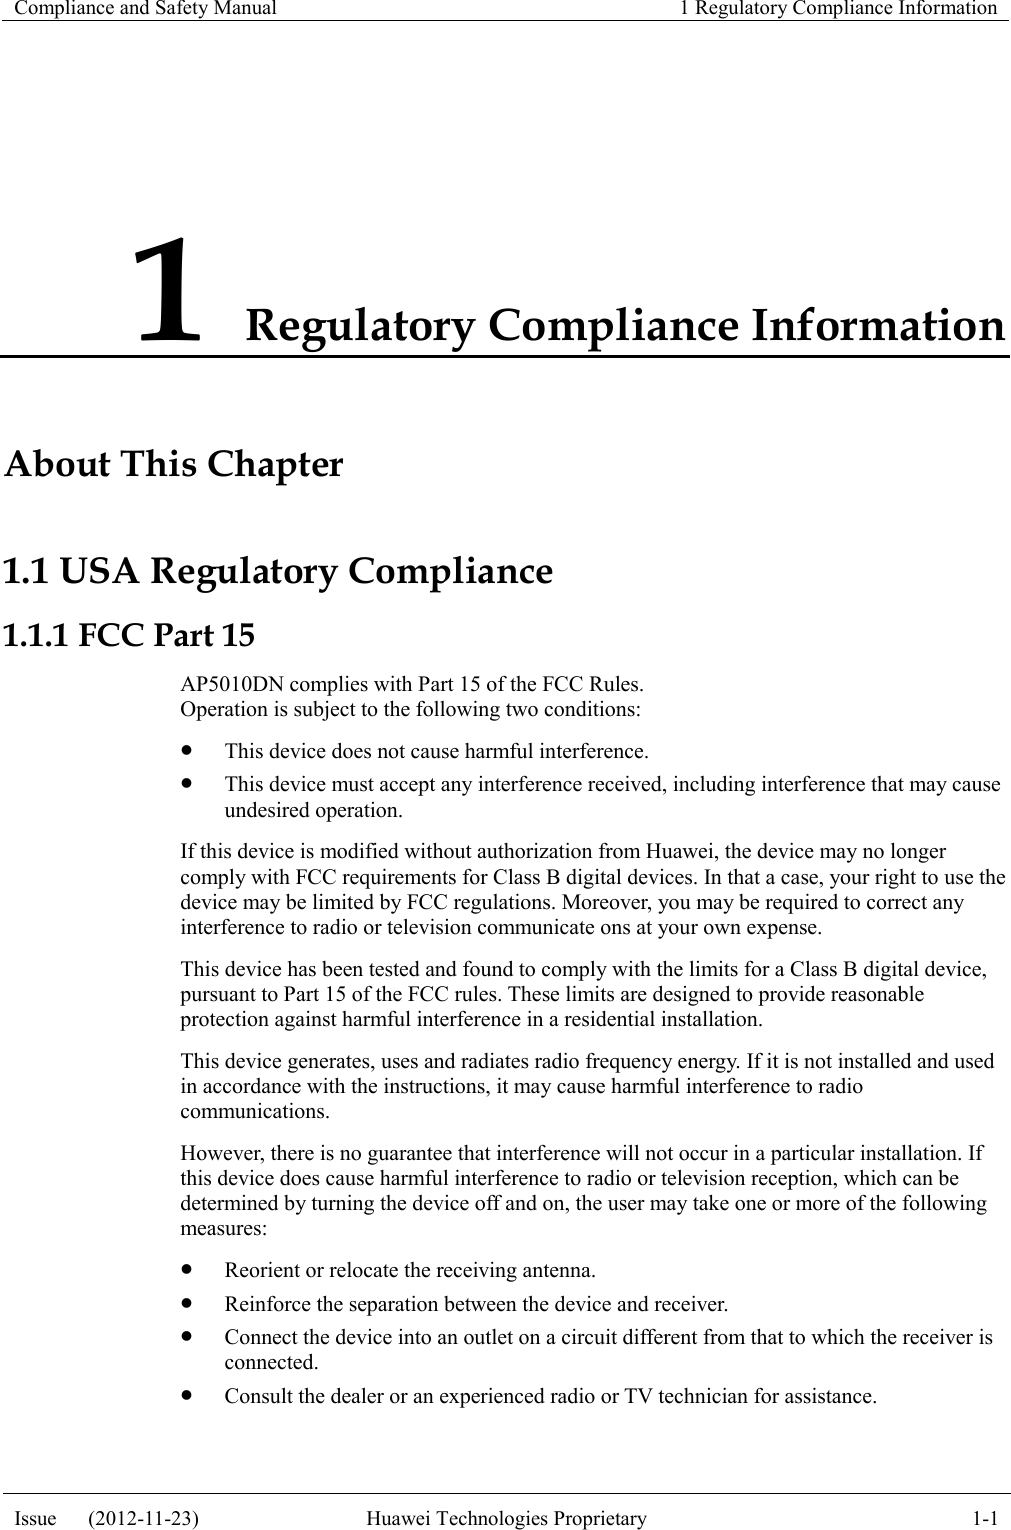 Compliance and Safety Manual 1 Regulatory Compliance Information  Issue      (2012-11-23) Huawei Technologies Proprietary 1-1  1 Regulatory Compliance Information About This Chapter 1.1 USA Regulatory Compliance 1.1.1 FCC Part 15 AP5010DN complies with Part 15 of the FCC Rules. Operation is subject to the following two conditions:  This device does not cause harmful interference.  This device must accept any interference received, including interference that may cause undesired operation. If this device is modified without authorization from Huawei, the device may no longer comply with FCC requirements for Class B digital devices. In that a case, your right to use the device may be limited by FCC regulations. Moreover, you may be required to correct any interference to radio or television communicate ons at your own expense. This device has been tested and found to comply with the limits for a Class B digital device, pursuant to Part 15 of the FCC rules. These limits are designed to provide reasonable protection against harmful interference in a residential installation. This device generates, uses and radiates radio frequency energy. If it is not installed and used in accordance with the instructions, it may cause harmful interference to radio communications. However, there is no guarantee that interference will not occur in a particular installation. If this device does cause harmful interference to radio or television reception, which can be determined by turning the device off and on, the user may take one or more of the following measures:  Reorient or relocate the receiving antenna.  Reinforce the separation between the device and receiver.  Connect the device into an outlet on a circuit different from that to which the receiver is connected.  Consult the dealer or an experienced radio or TV technician for assistance. 